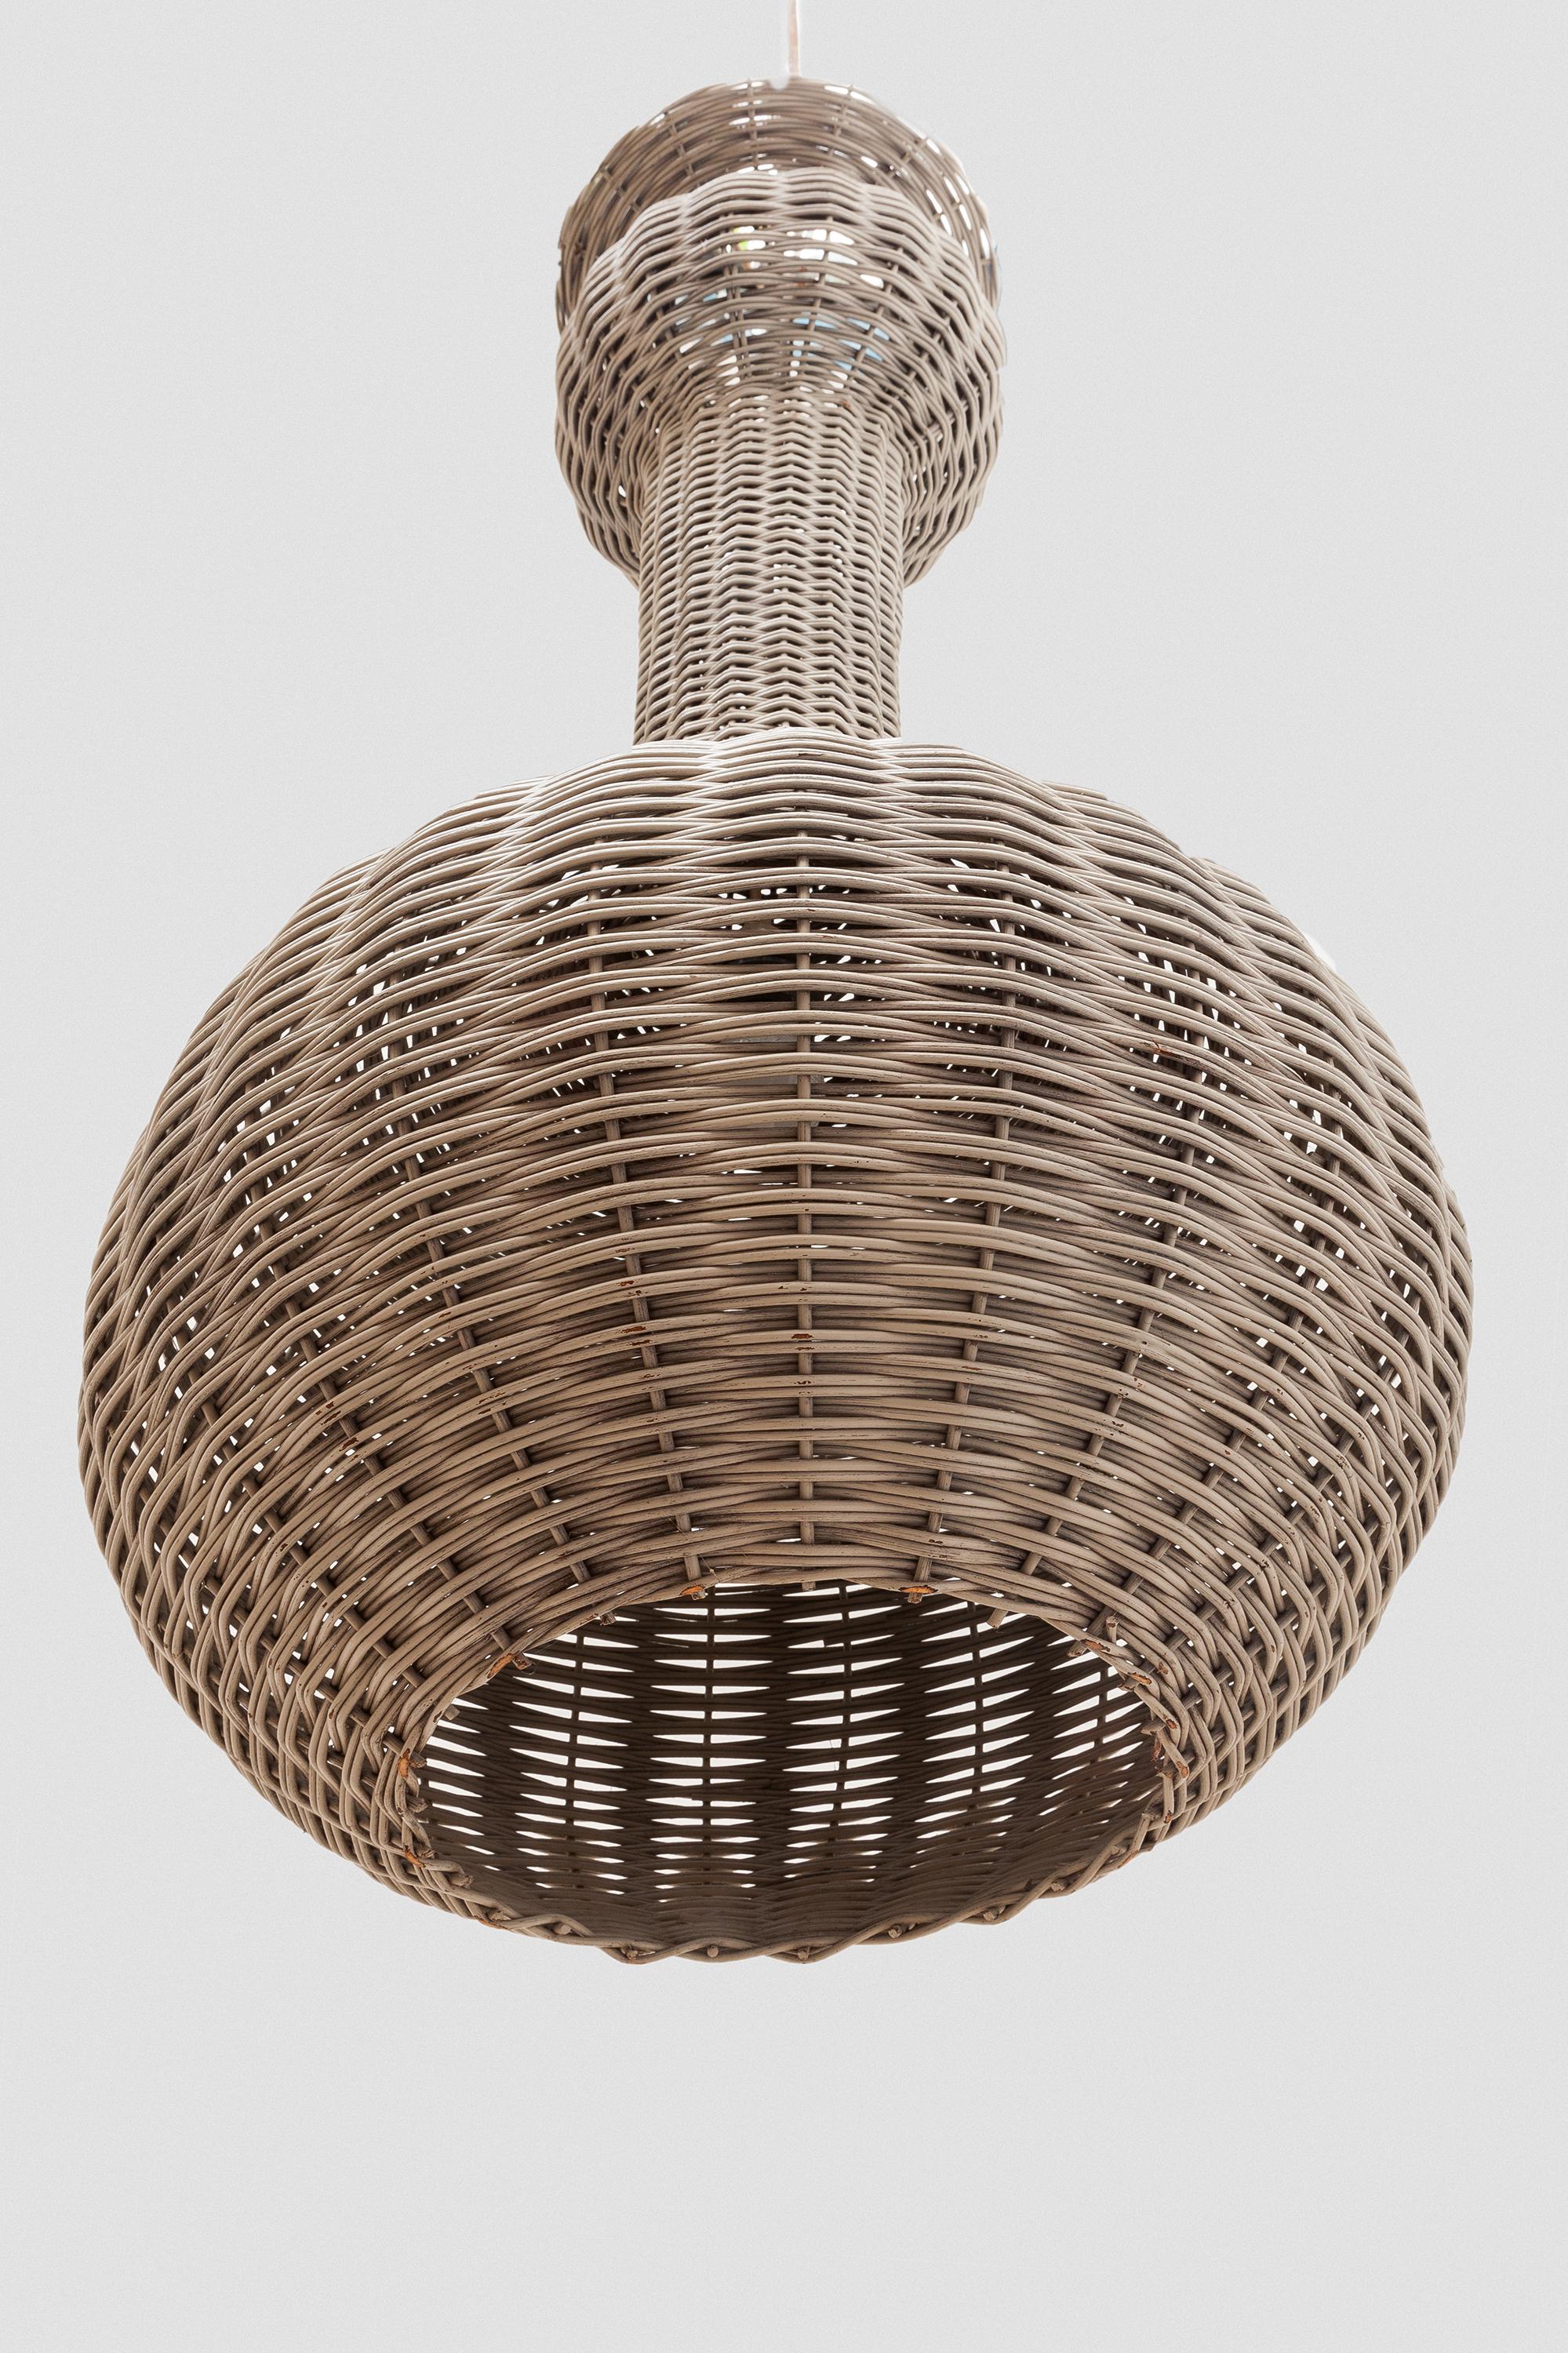 Hand-Woven Large Modern Wicker Pendant Lamp, Italy, 1960s For Sale